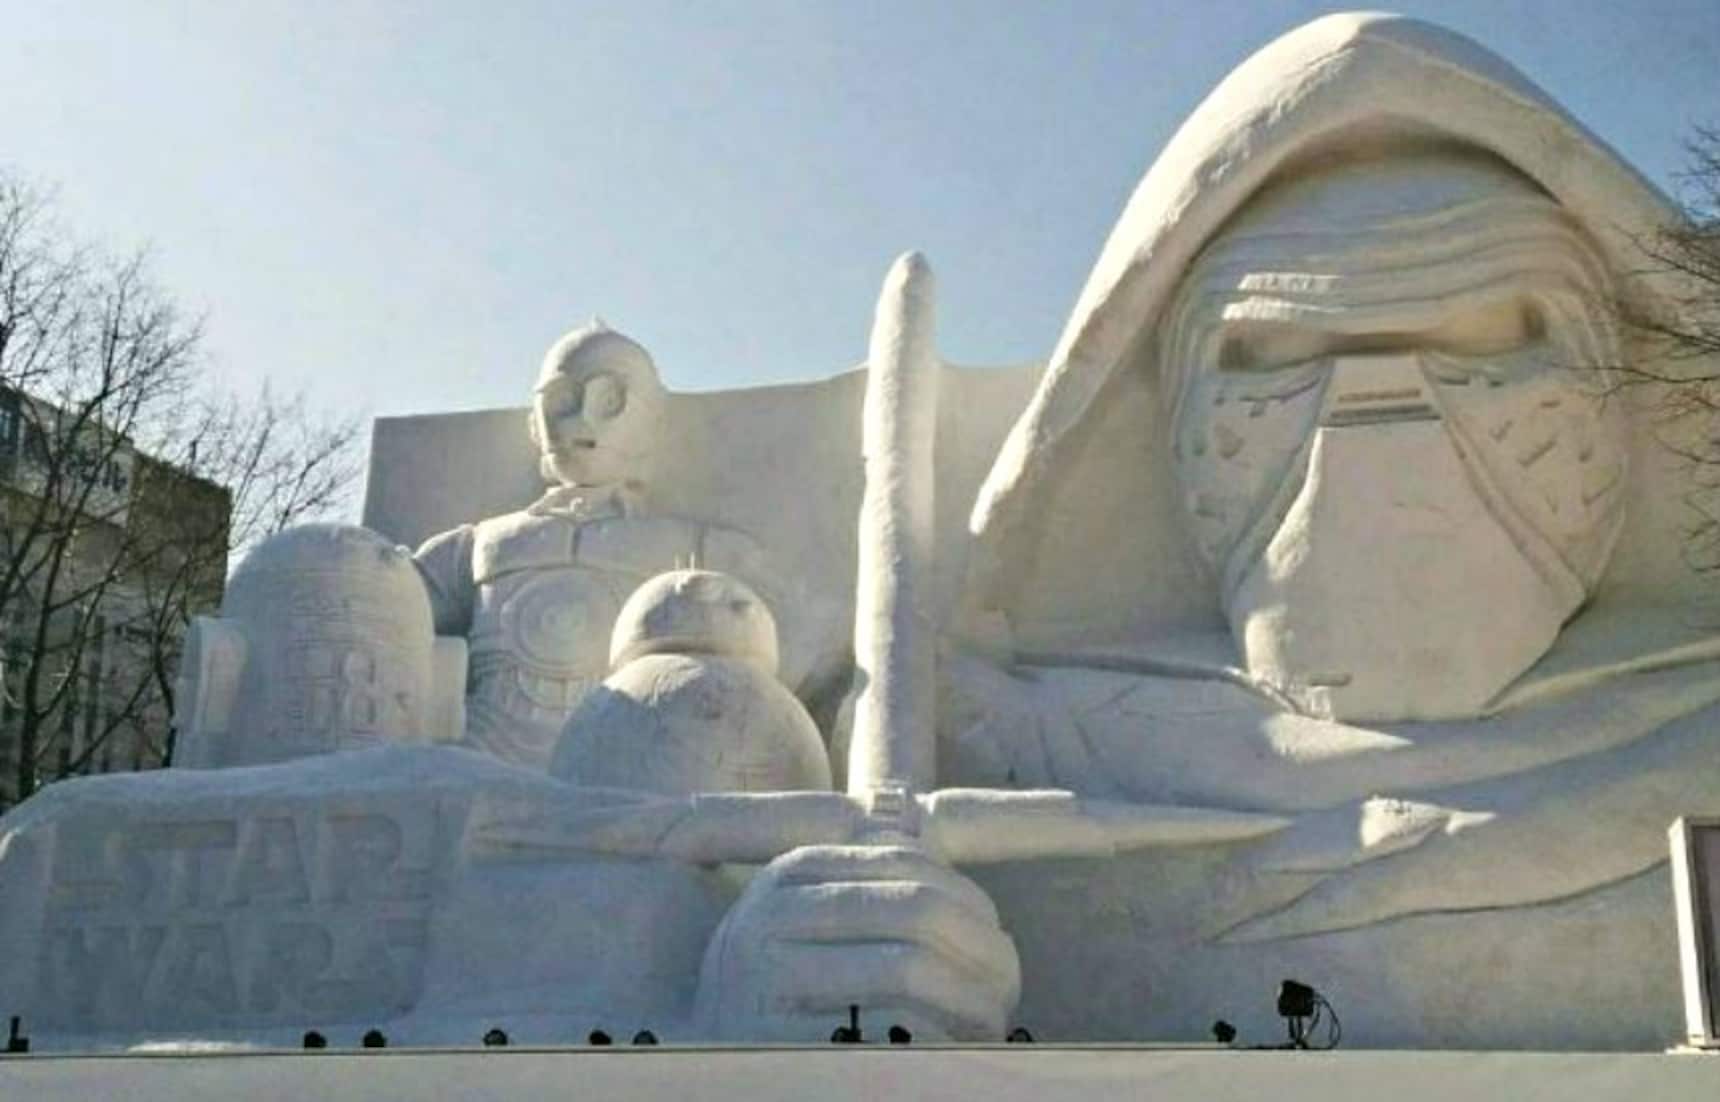 Taking Snow Sculptures to the Next Level